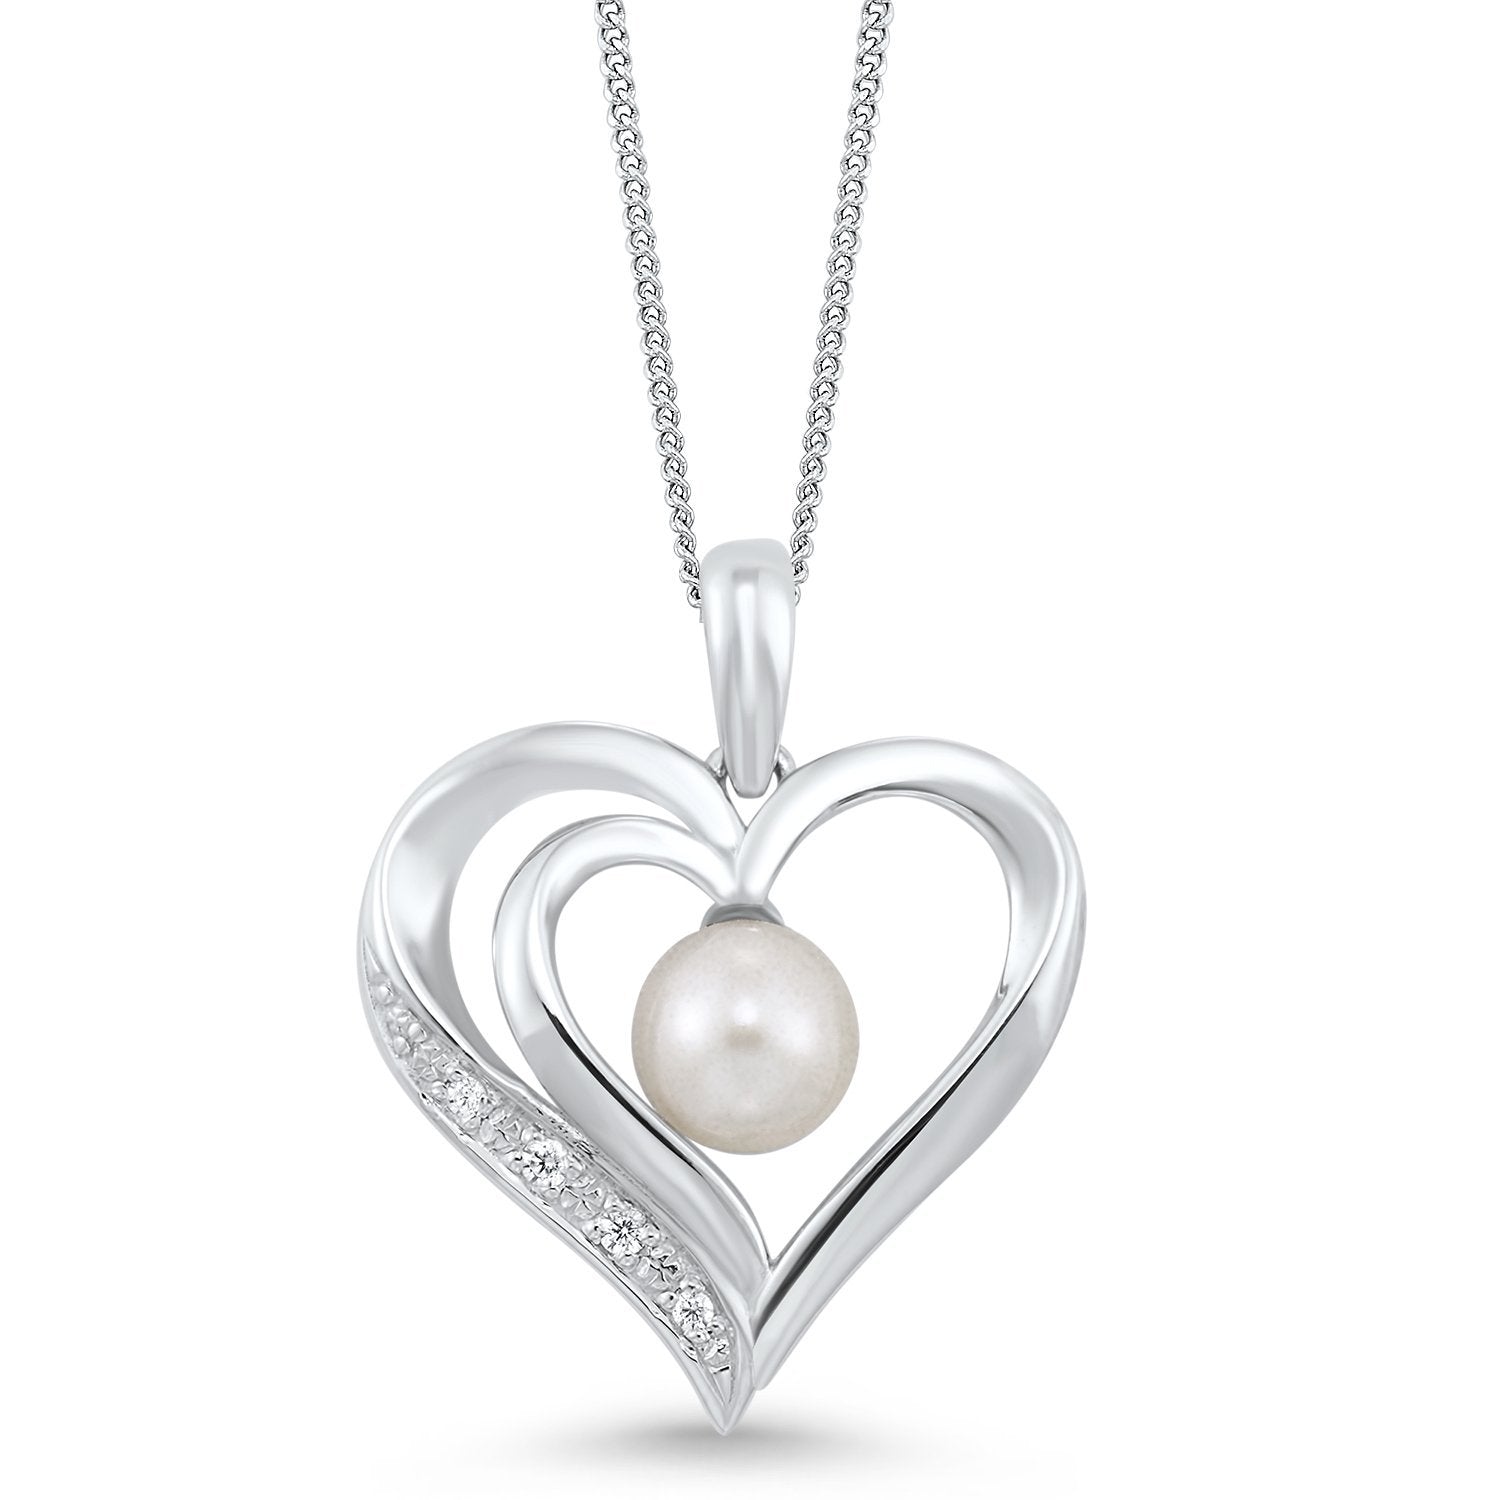 Freshwater Pearl Cage Silver Heart Pendant Necklace With Copper, White Gold  Plates, Hollow Openwork, Pumpkin Heart, And Oyster Pearls Sautoir Mix Bulk  Jewelry From Jane012, $1.05